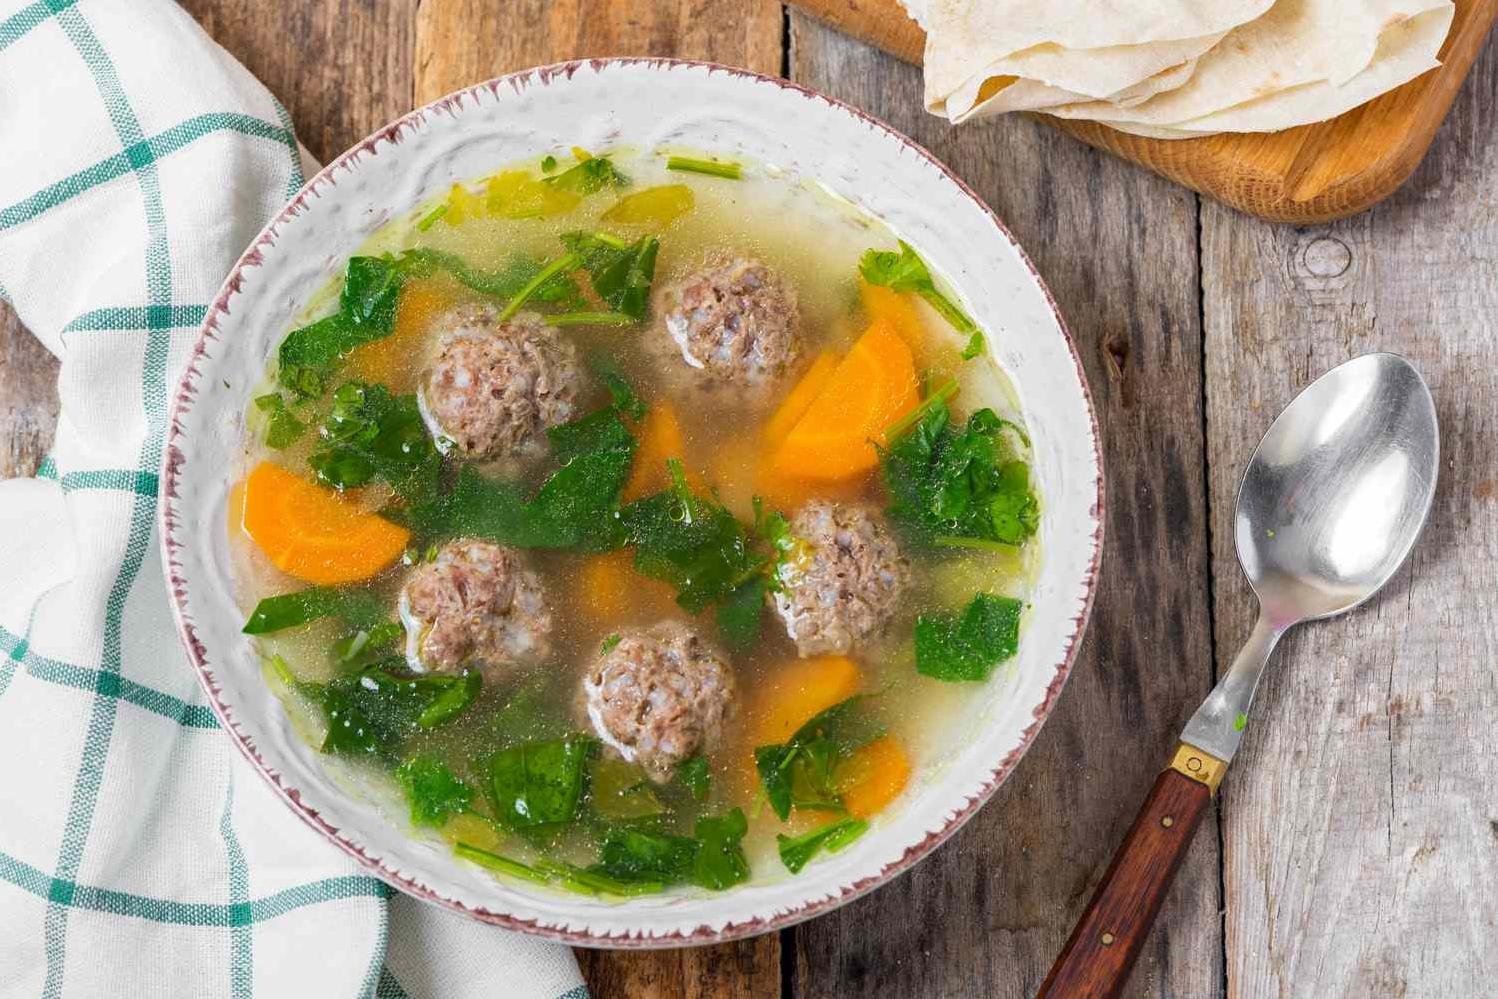  Juicy meatballs swimming in a flavorful broth